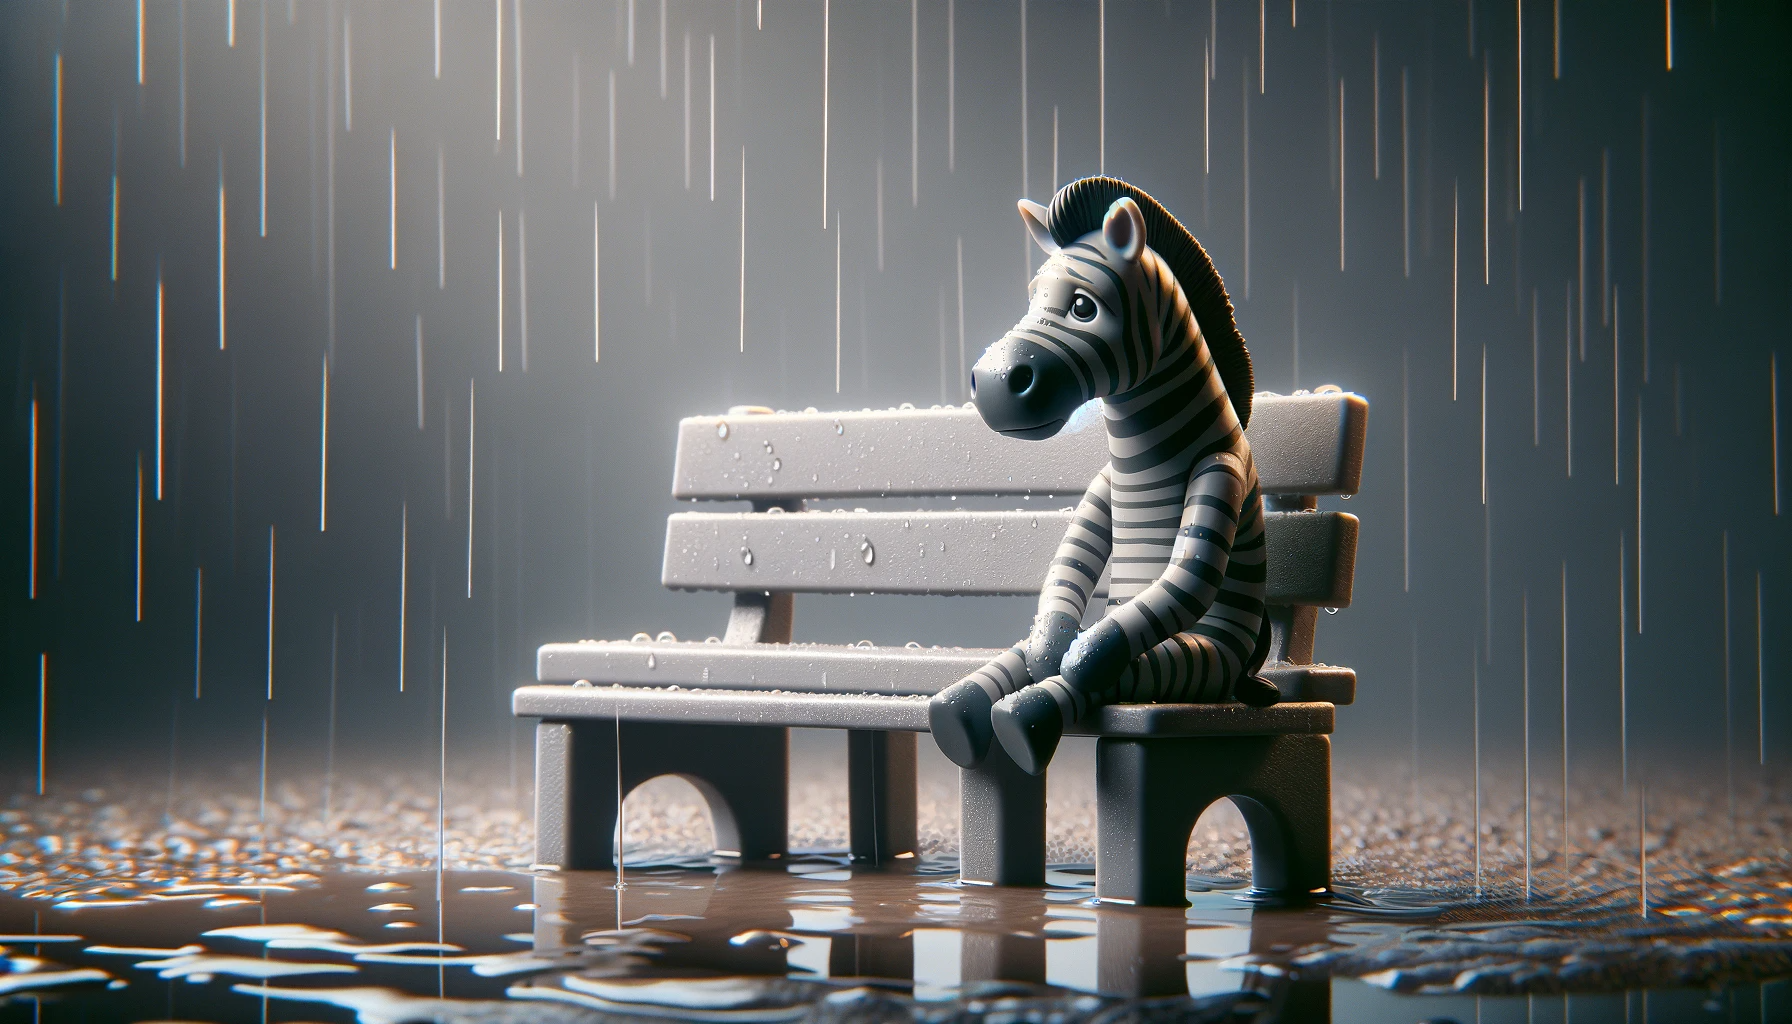 a plastic children's toy zebra sitting alone on a miniature plastic park bench designed for children, capturing a moment of solitude as it rains